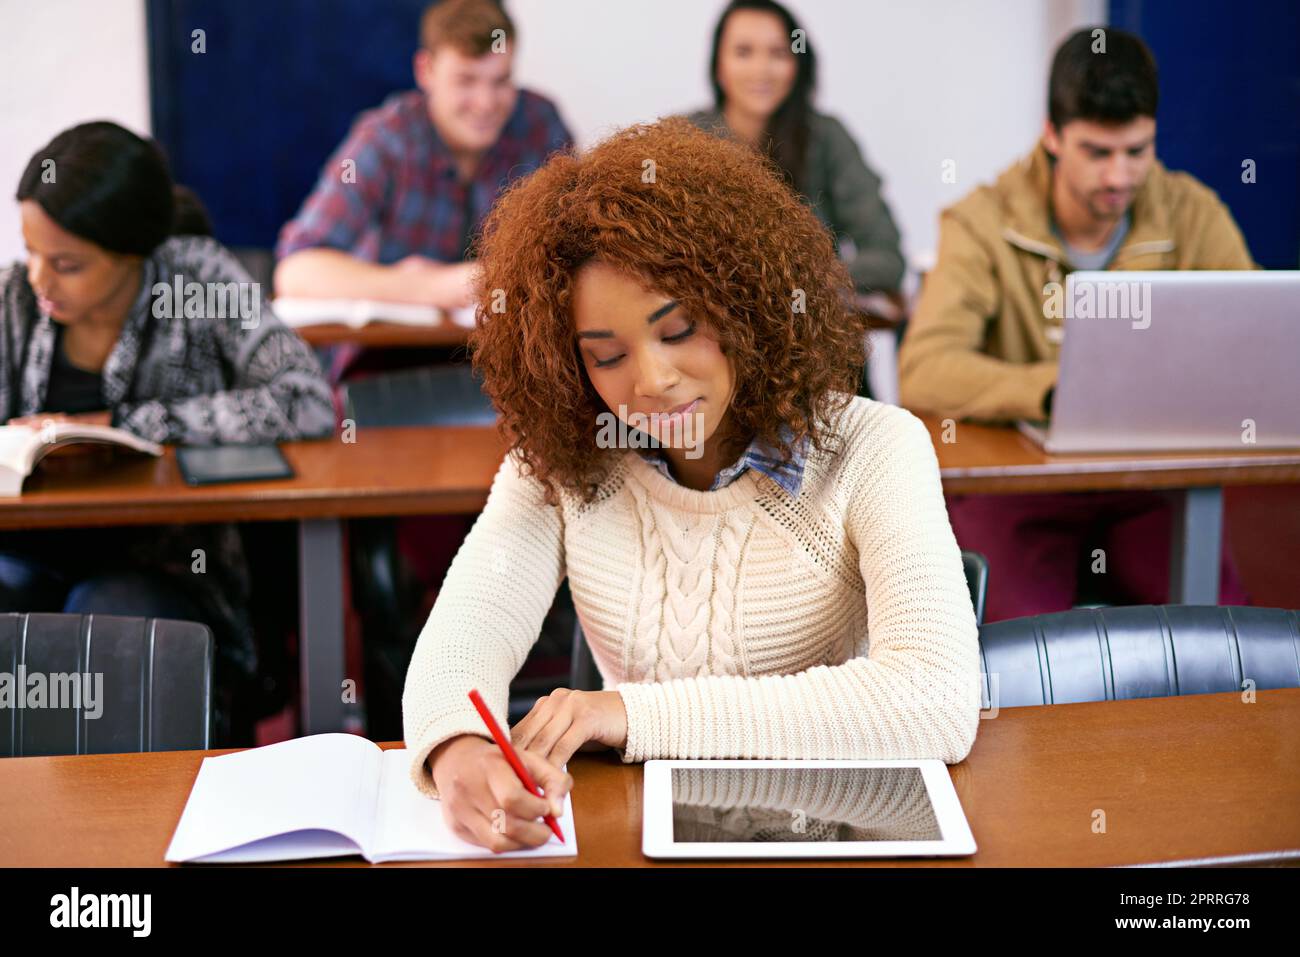 Following my dream. a student working at her desk in class with a digital tablet. Stock Photo